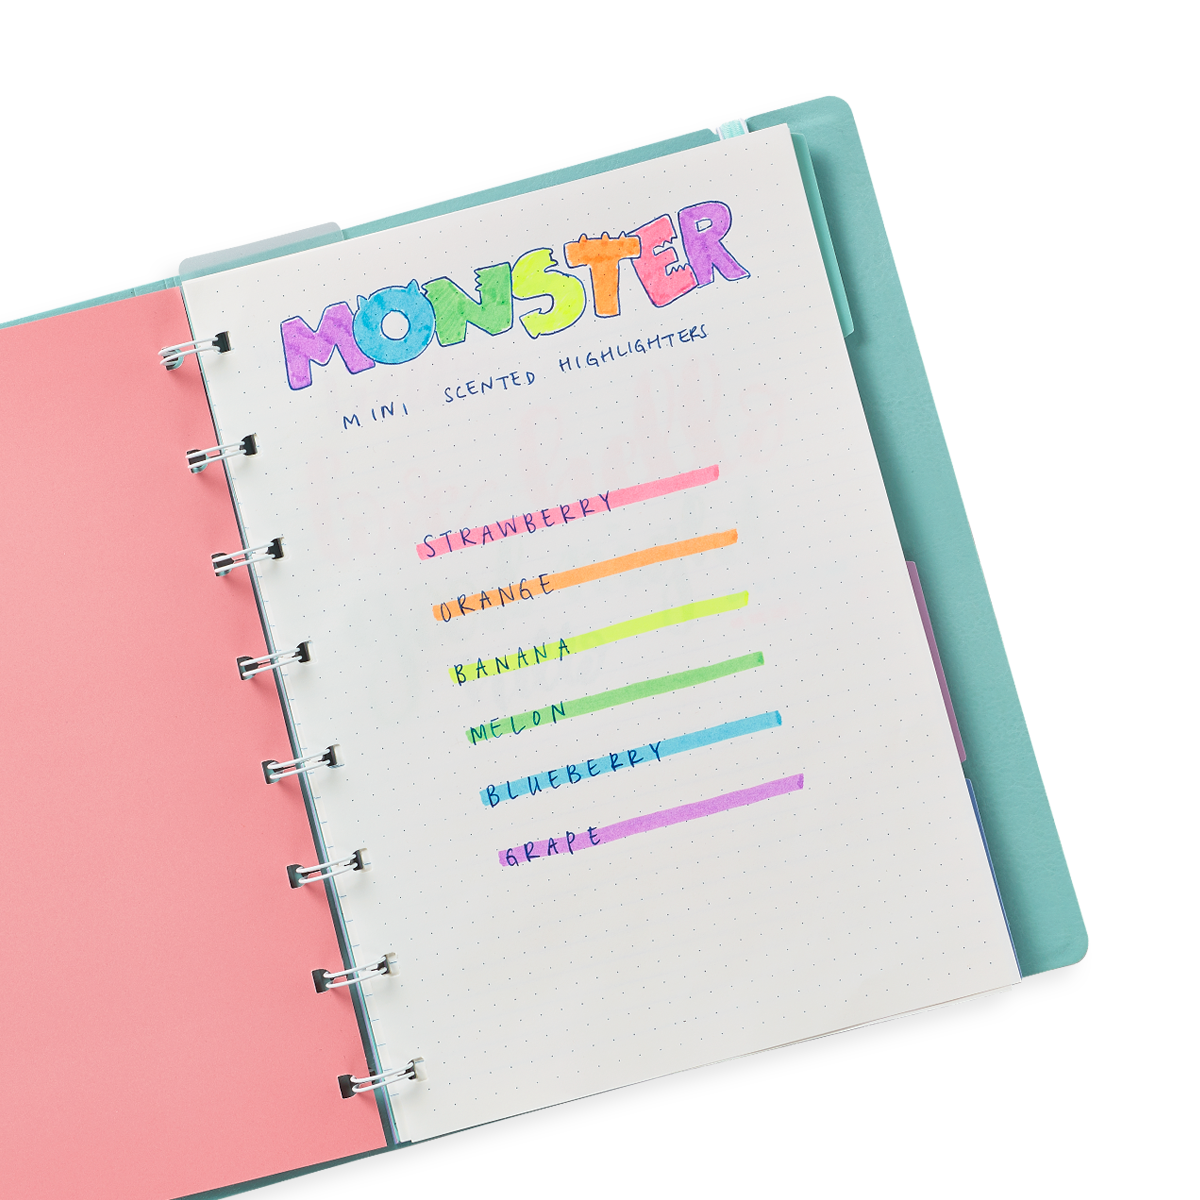 Paper Bear Shop OOLY Mini Monster Scented Highlighter Markers